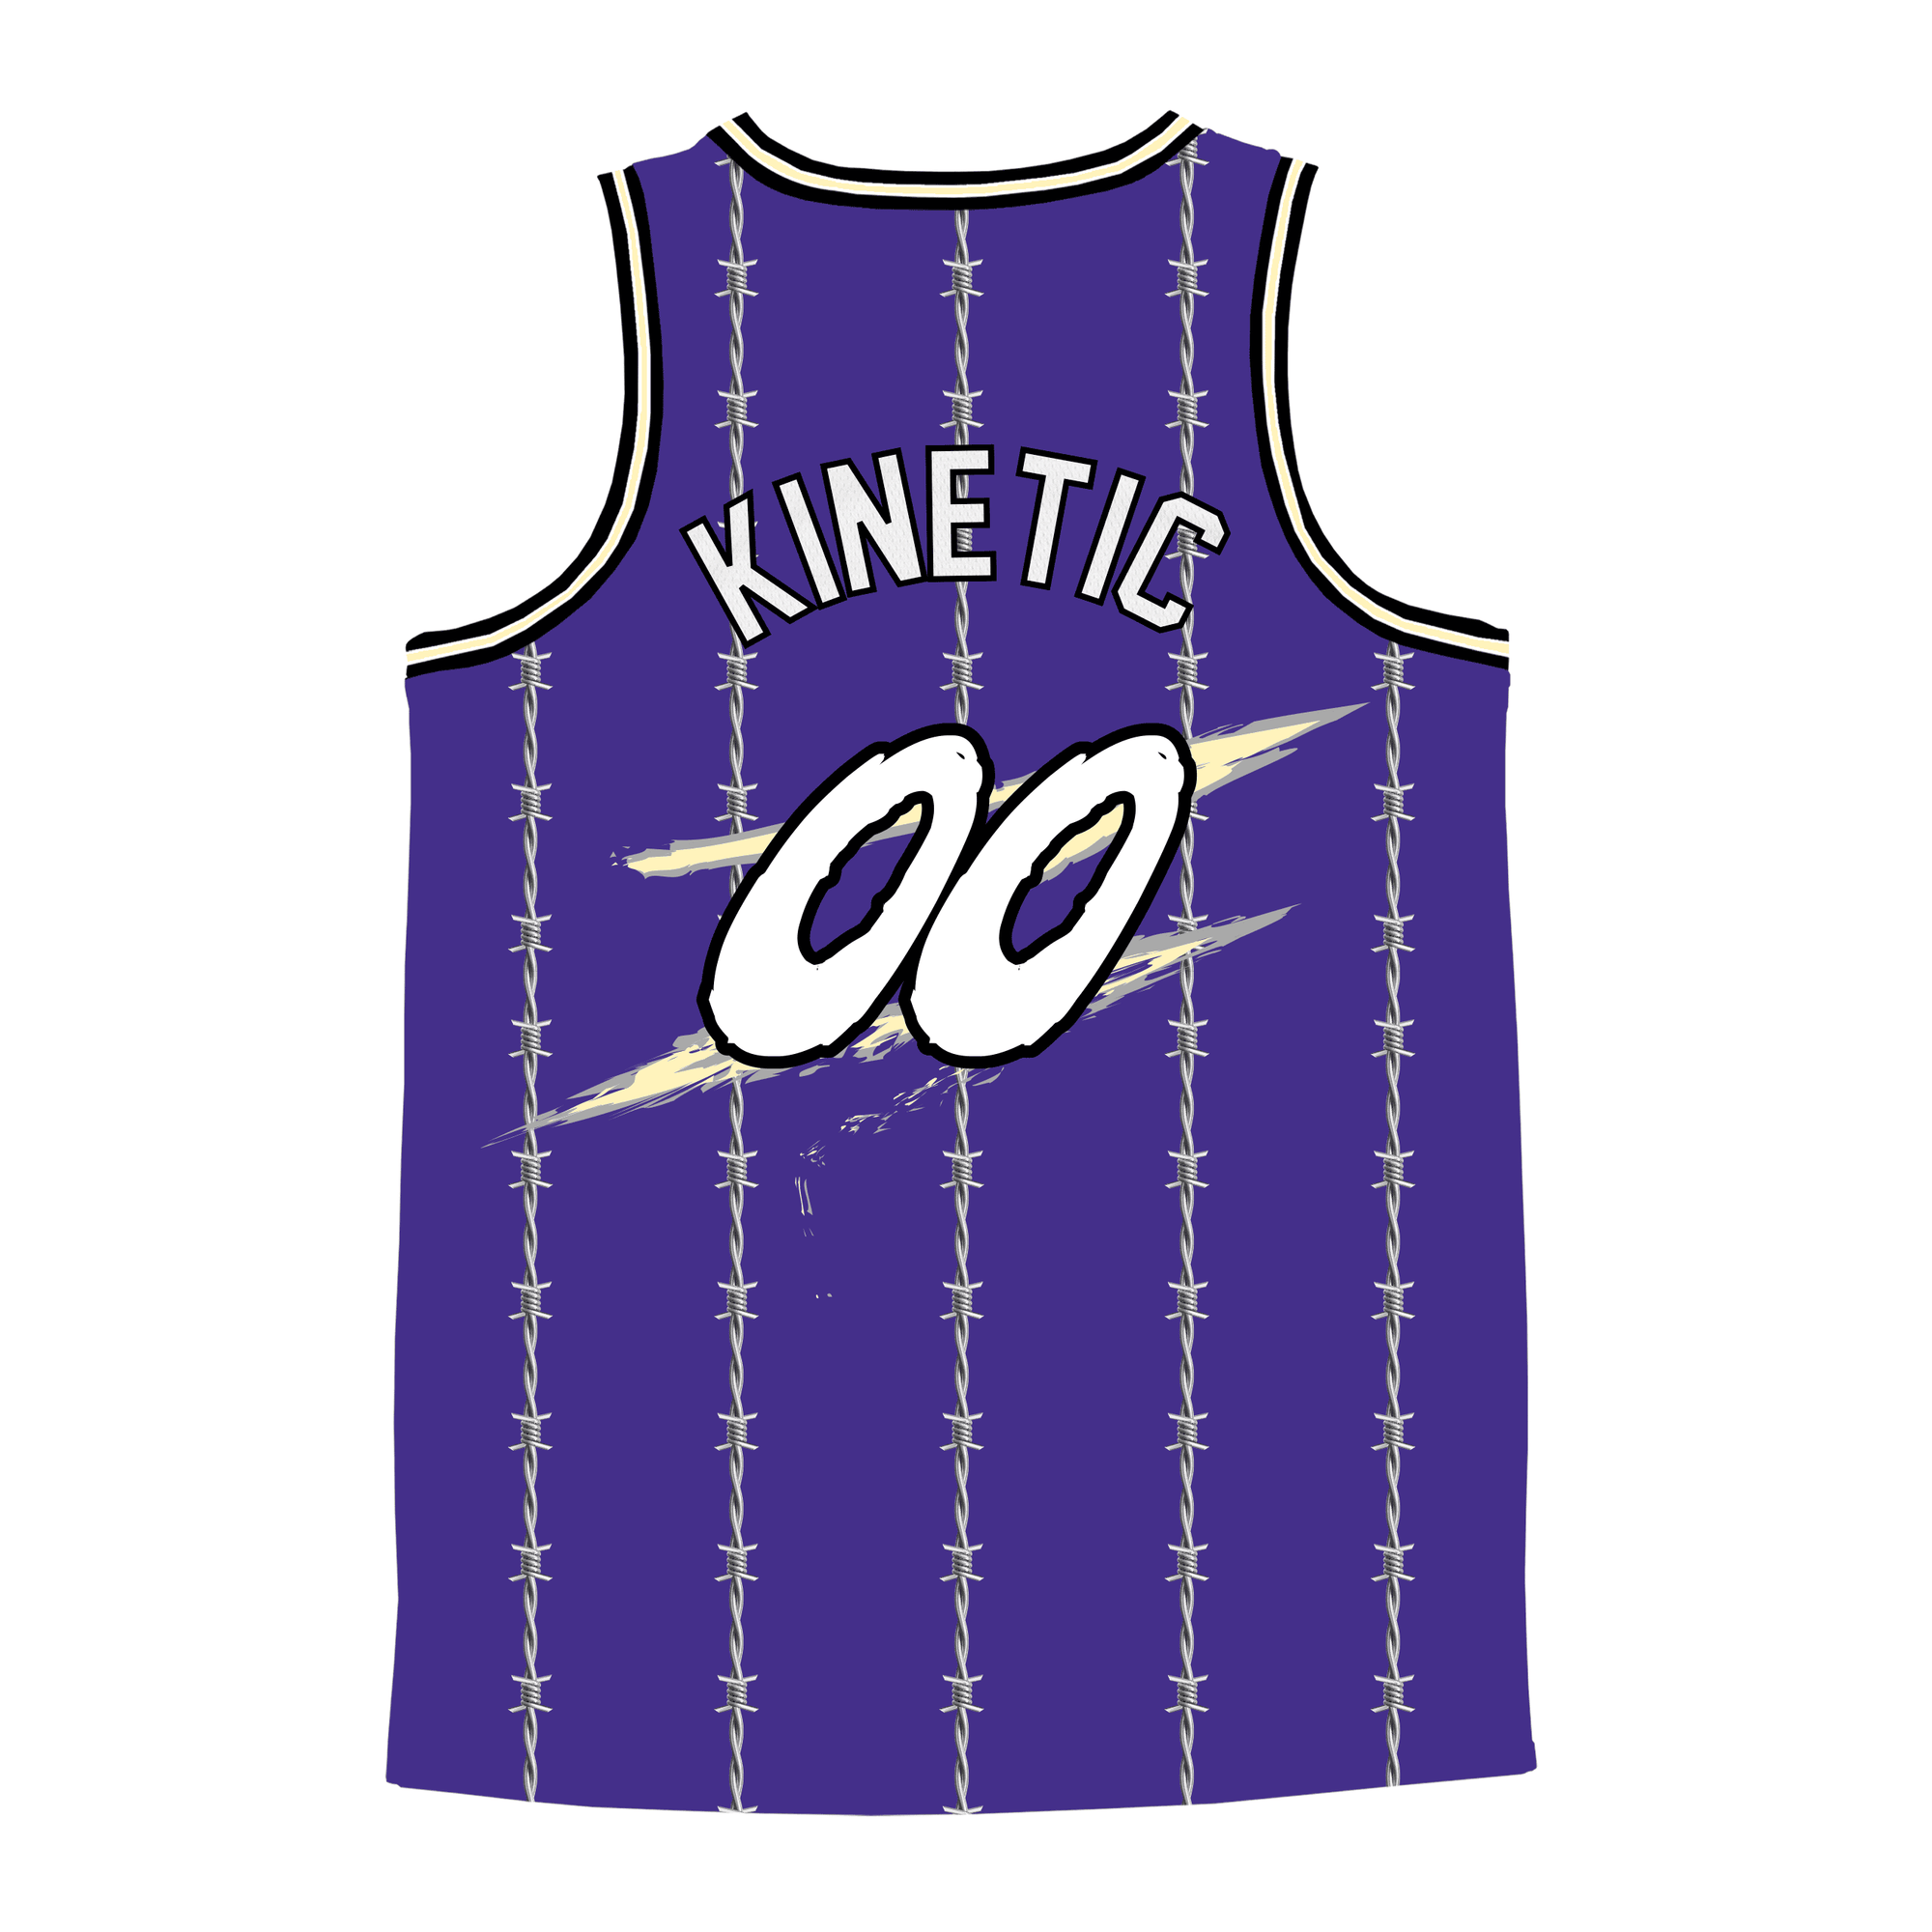 Zeta Psi - Barbed Wire Basketball Jersey